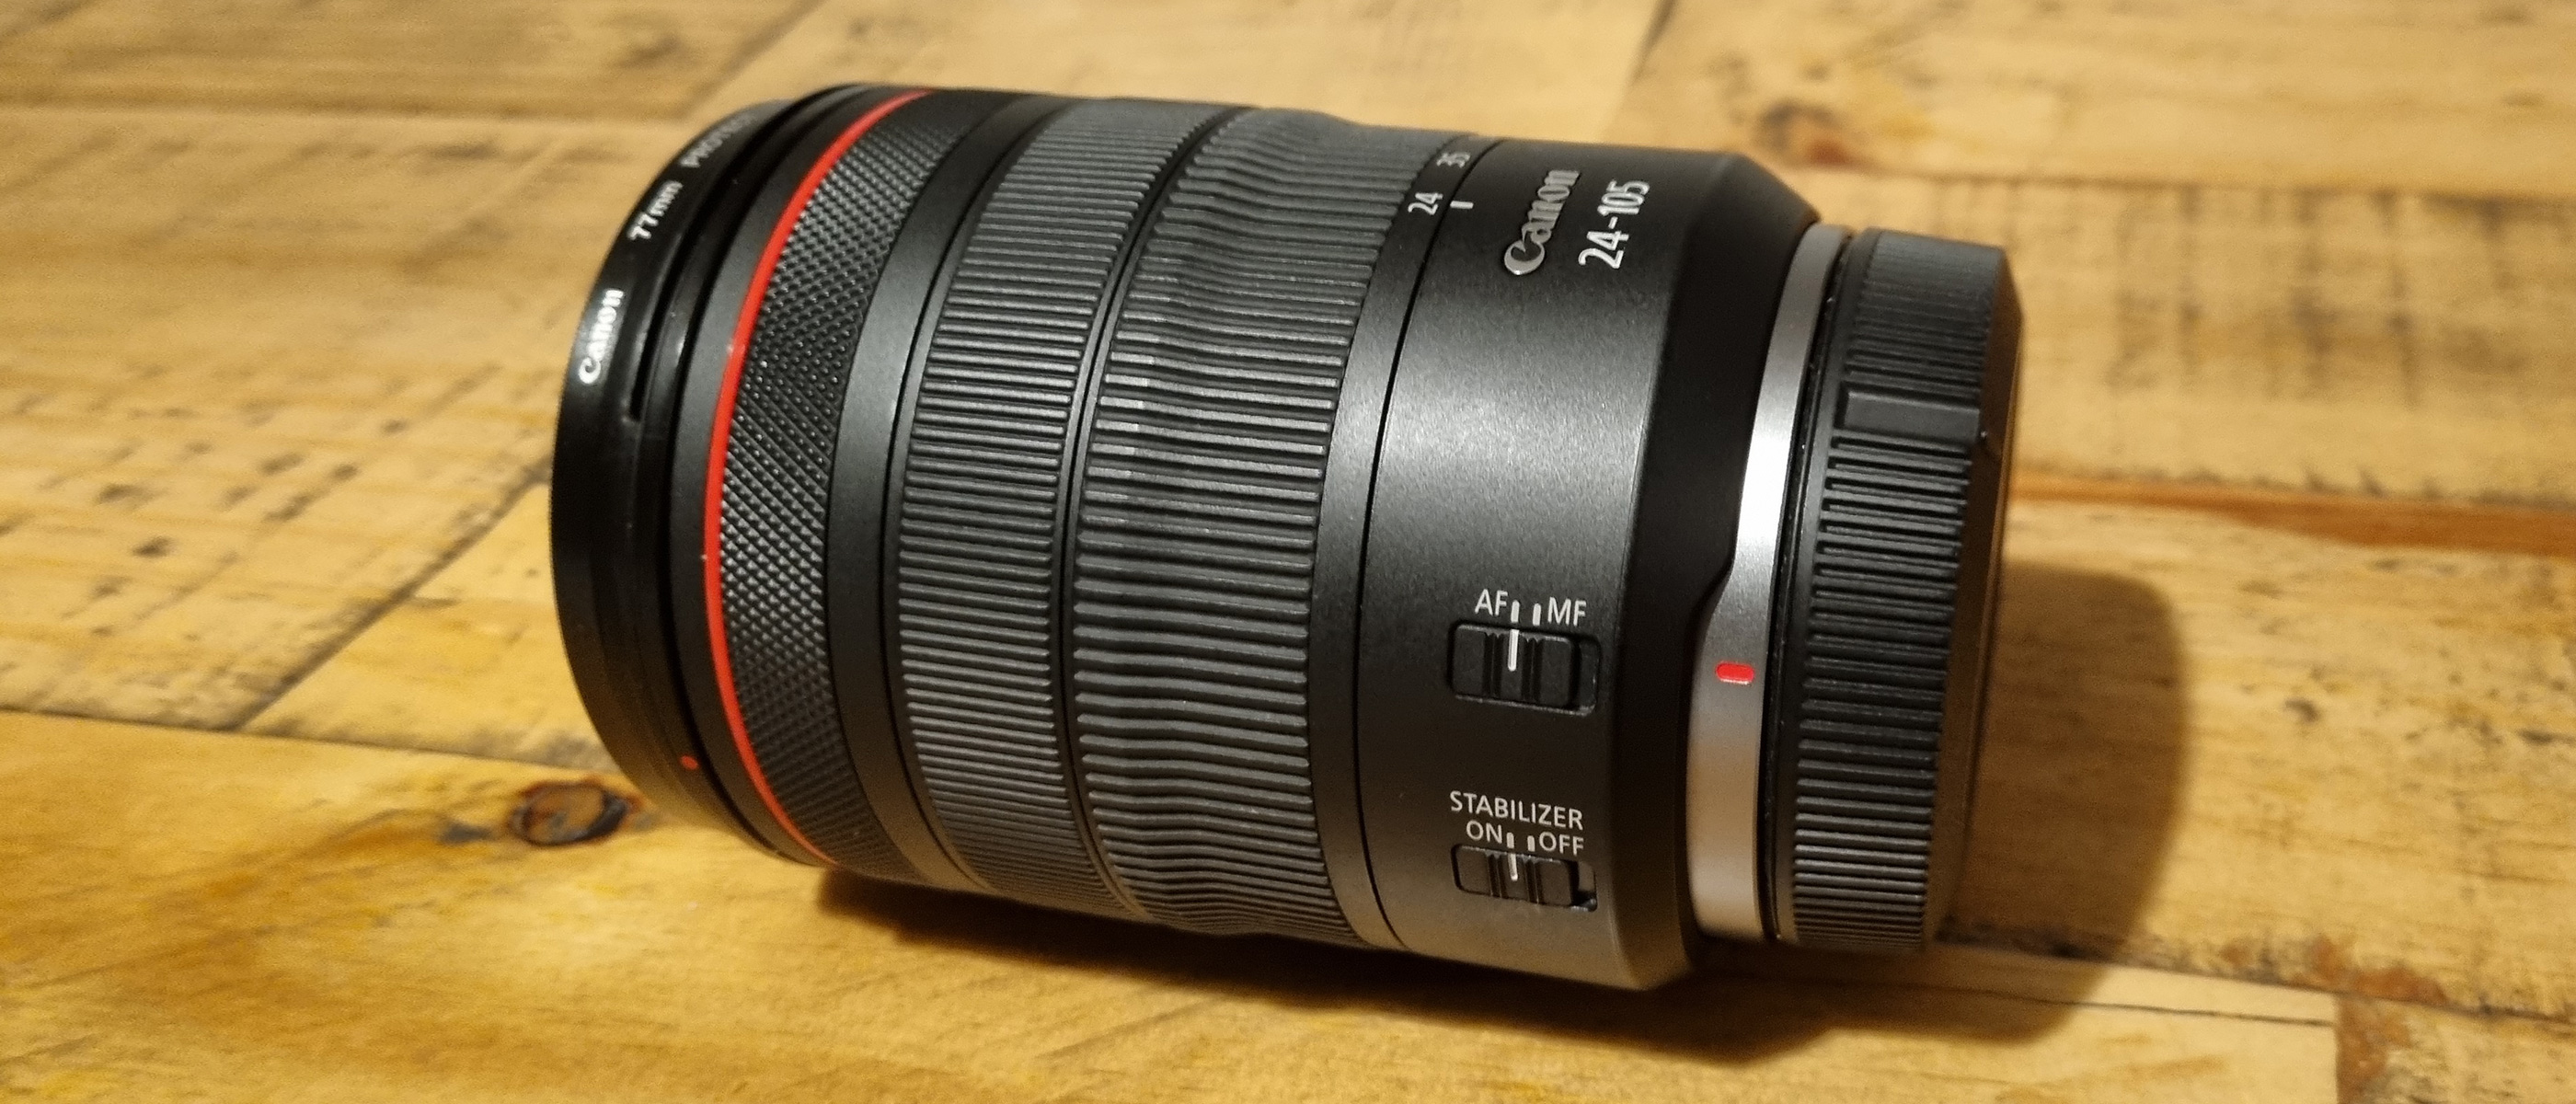 Canon RF 24-105mm f/4L IS USM review